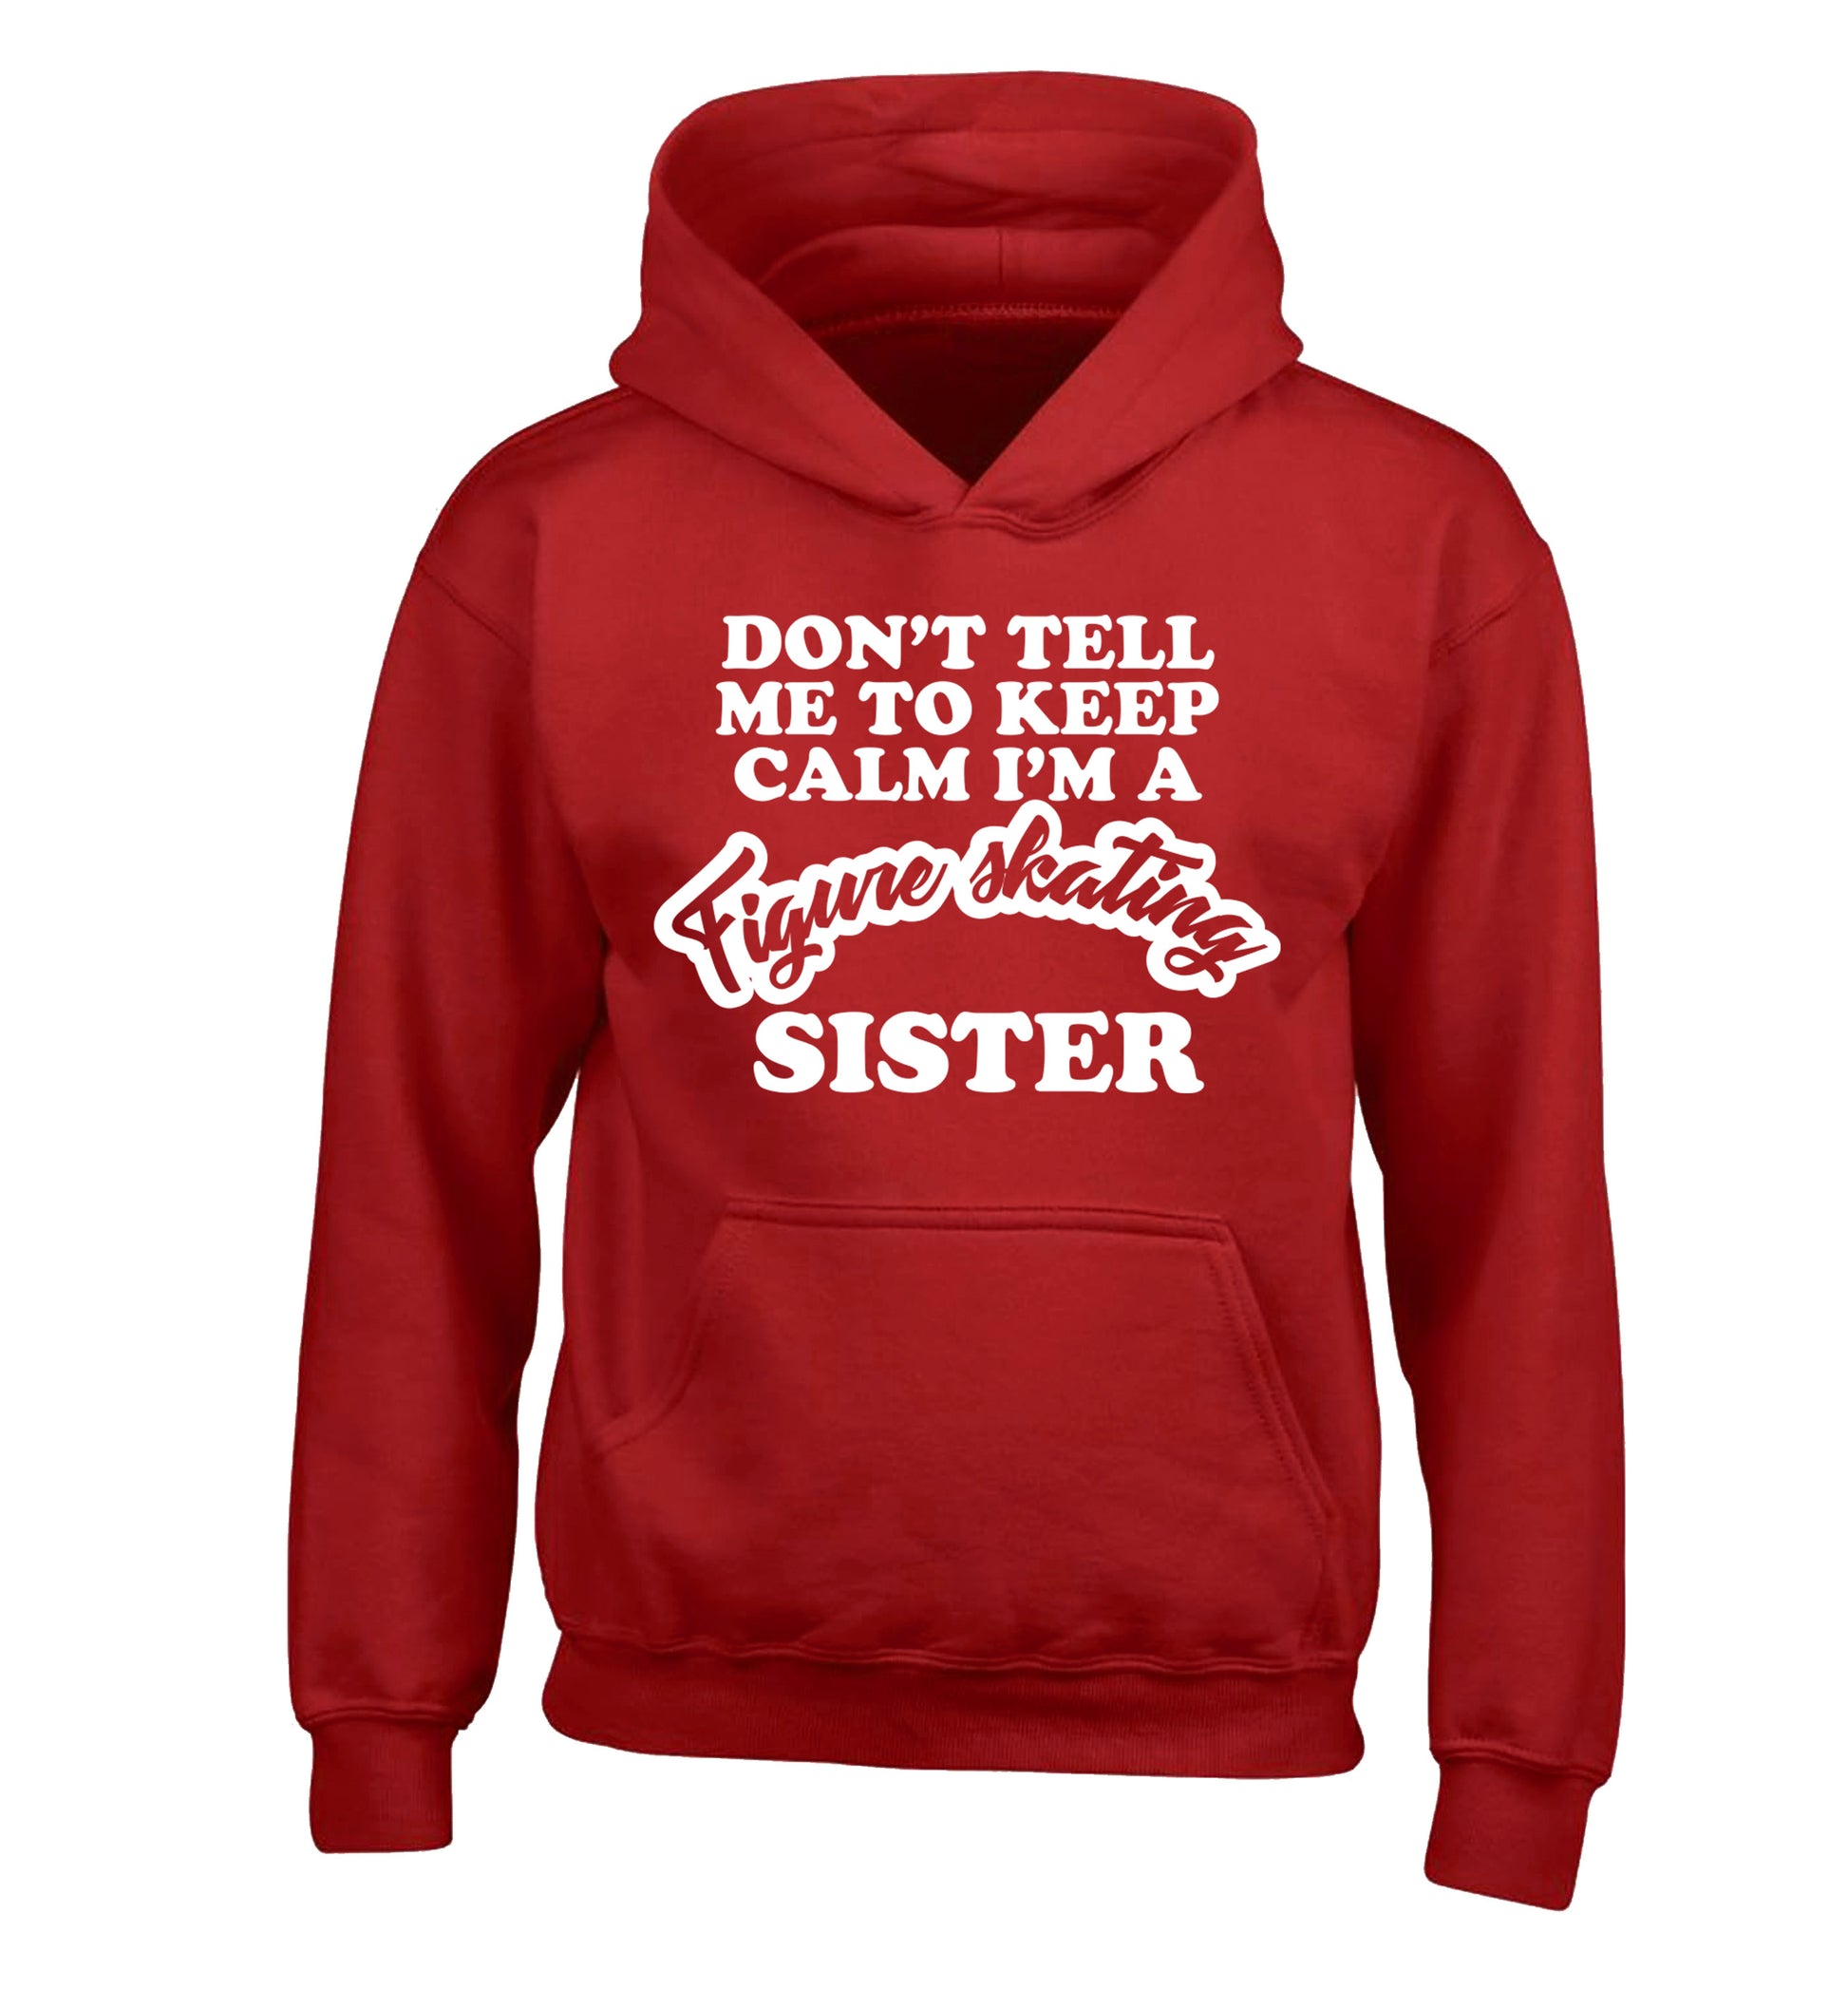 Don't tell me to keep calm I'm a figure skating sister children's red hoodie 12-14 Years